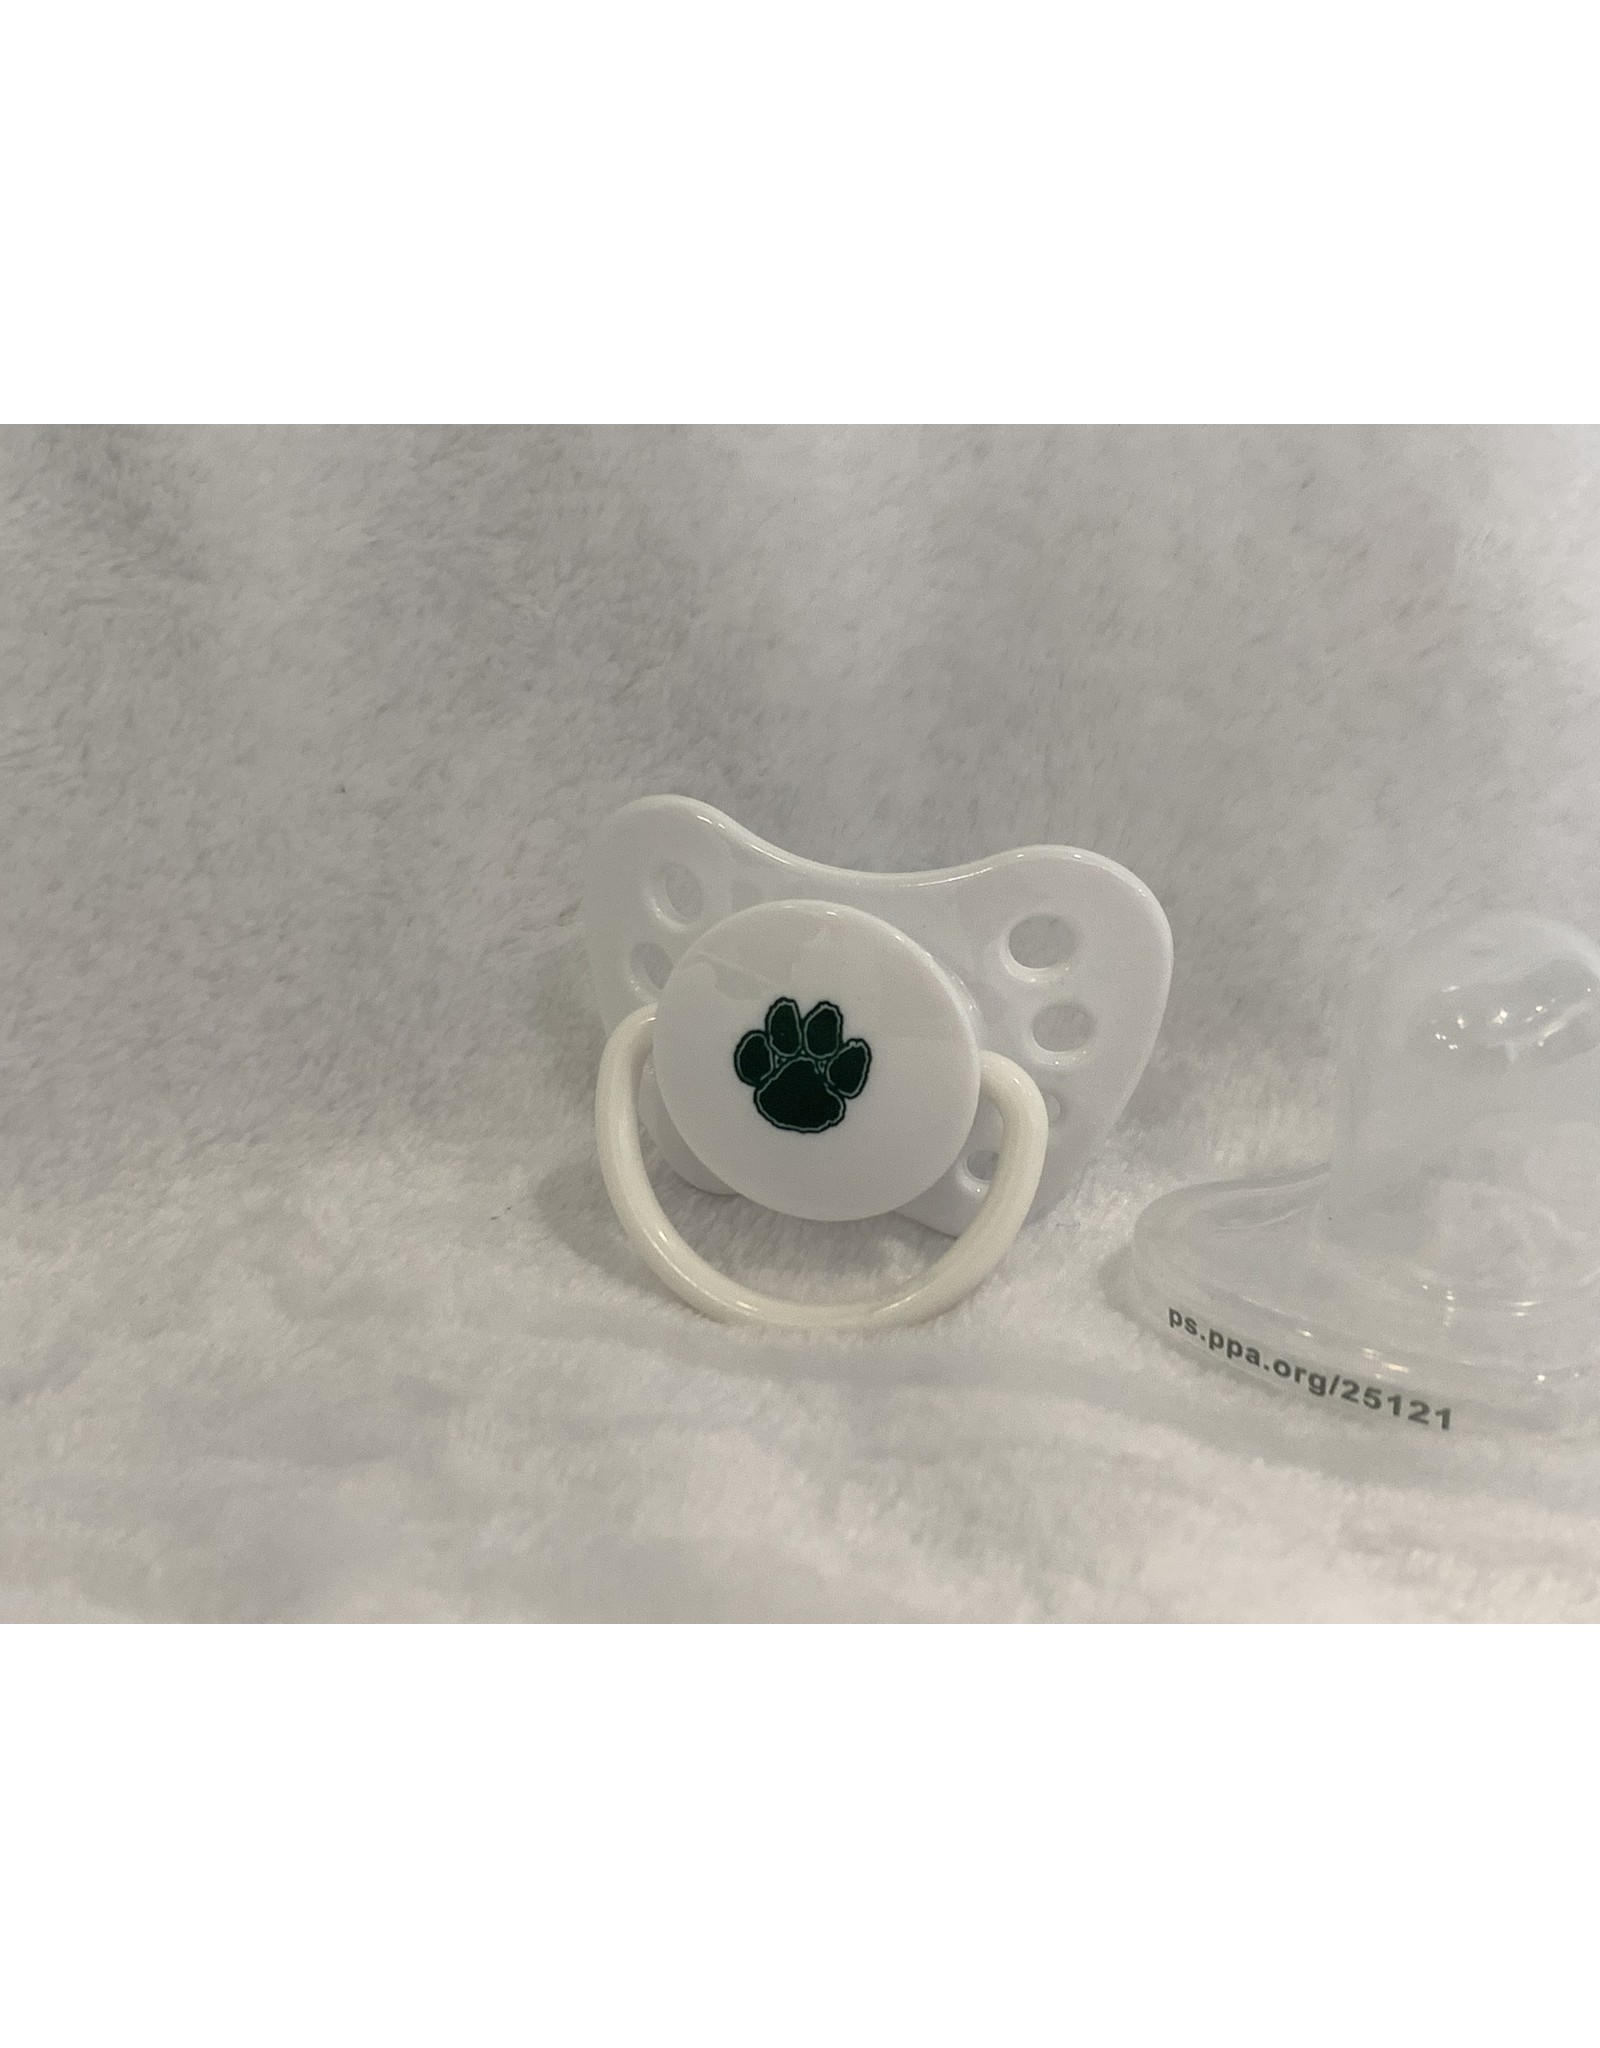 Pacifier with Paw 6-18 mo. Tritan plastic